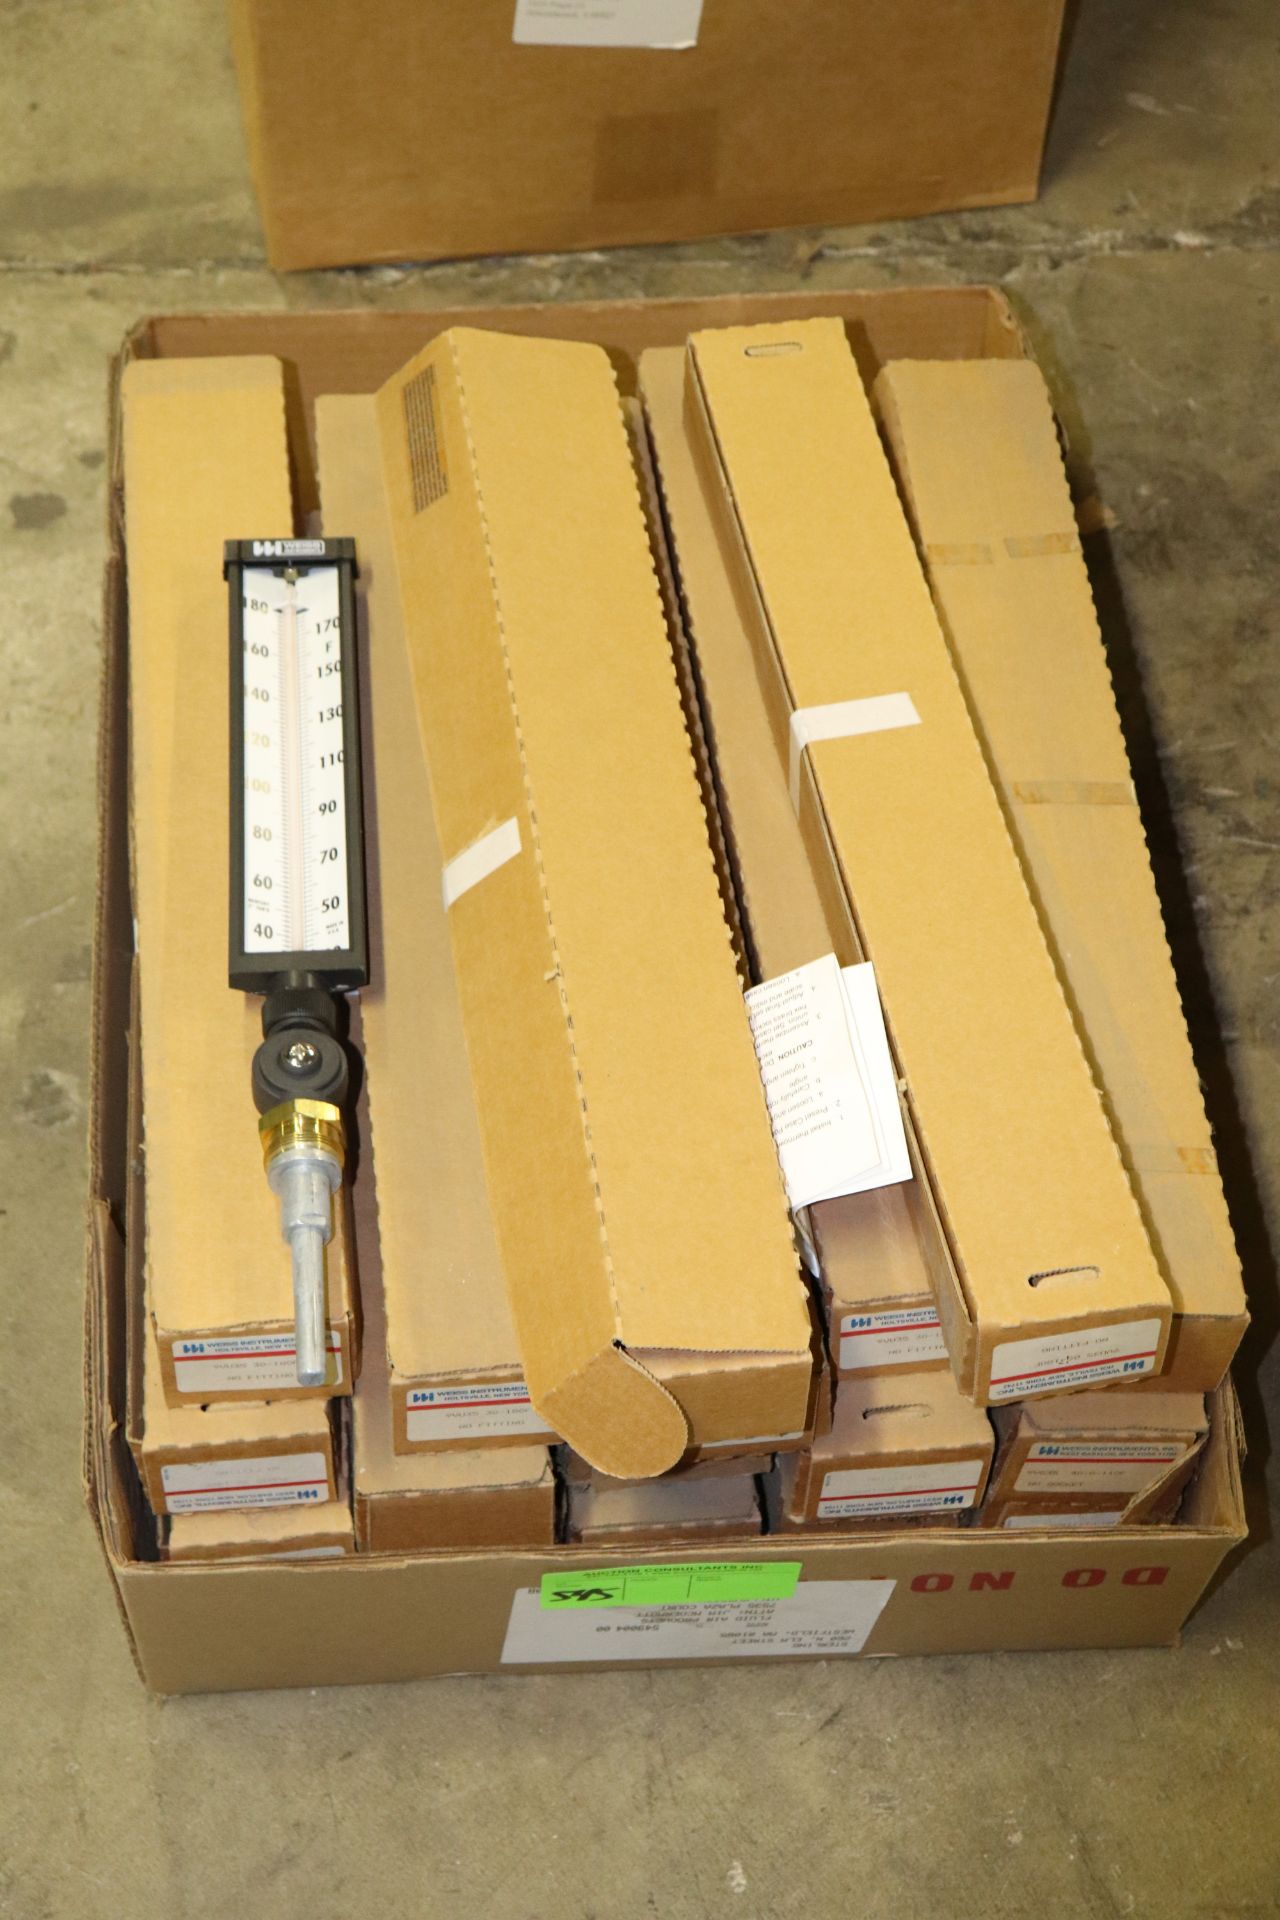 Twenty-two Weiss Instruments thermometers, new in box